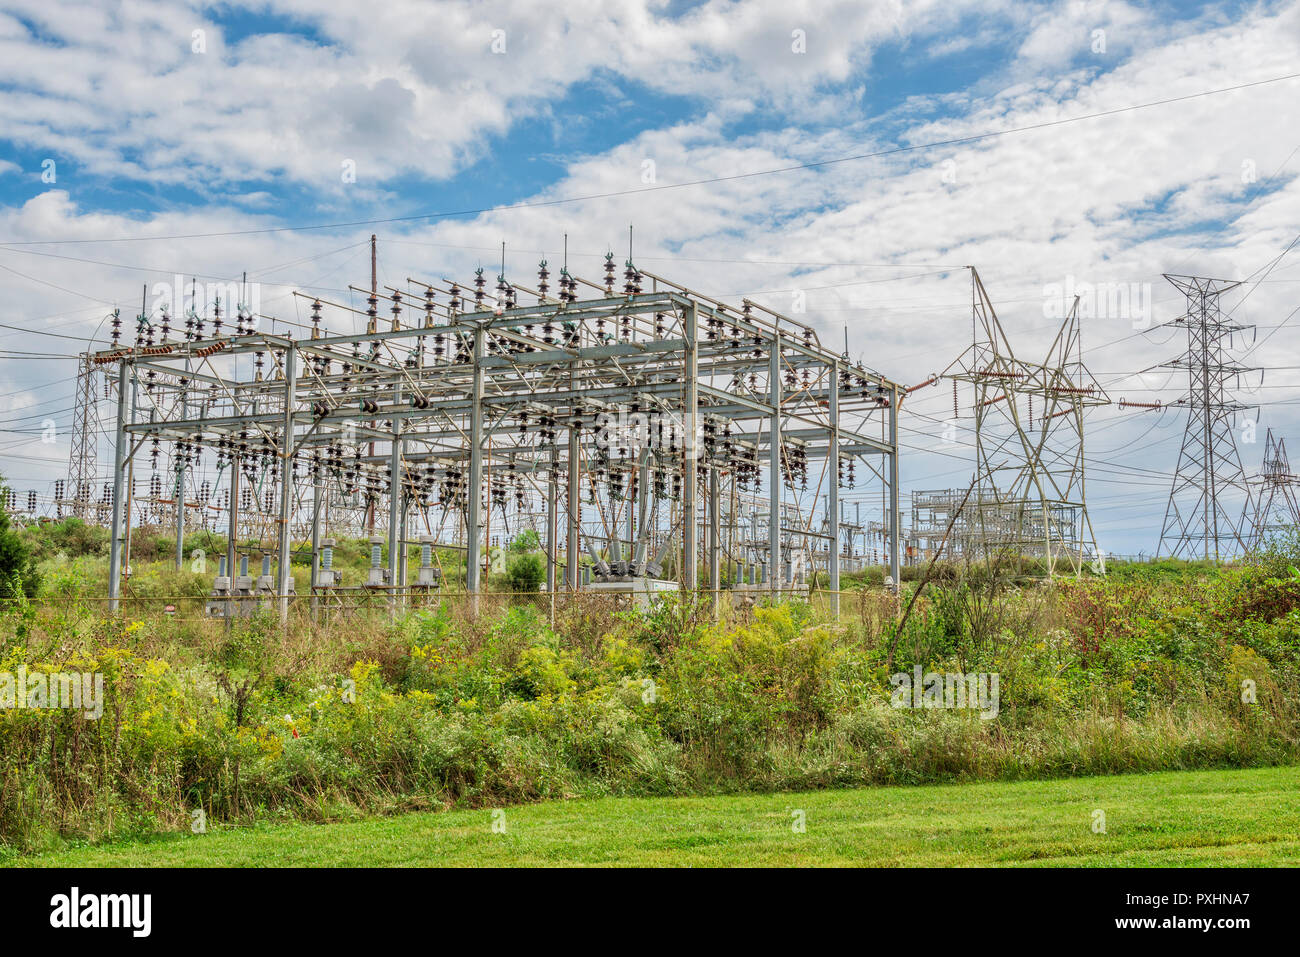 Horizontal shot of an Electric Power Grid Station under cloudy skies. Stock Photo